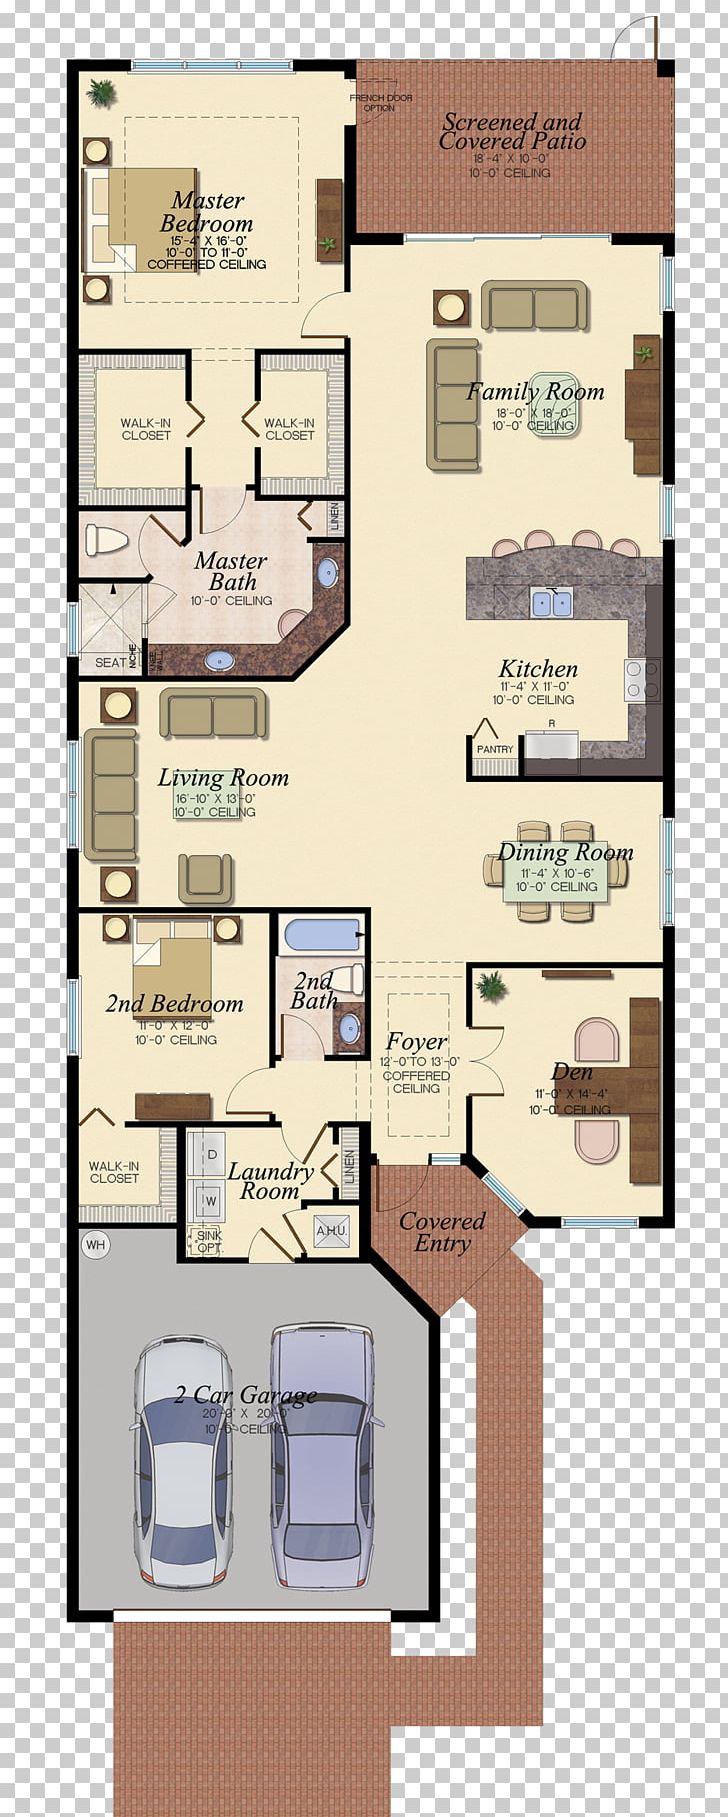 Floor Plan House Plan Architecture PNG, Clipart, Architecture, Bathroom, Bedroom, Building, Custom Home Free PNG Download